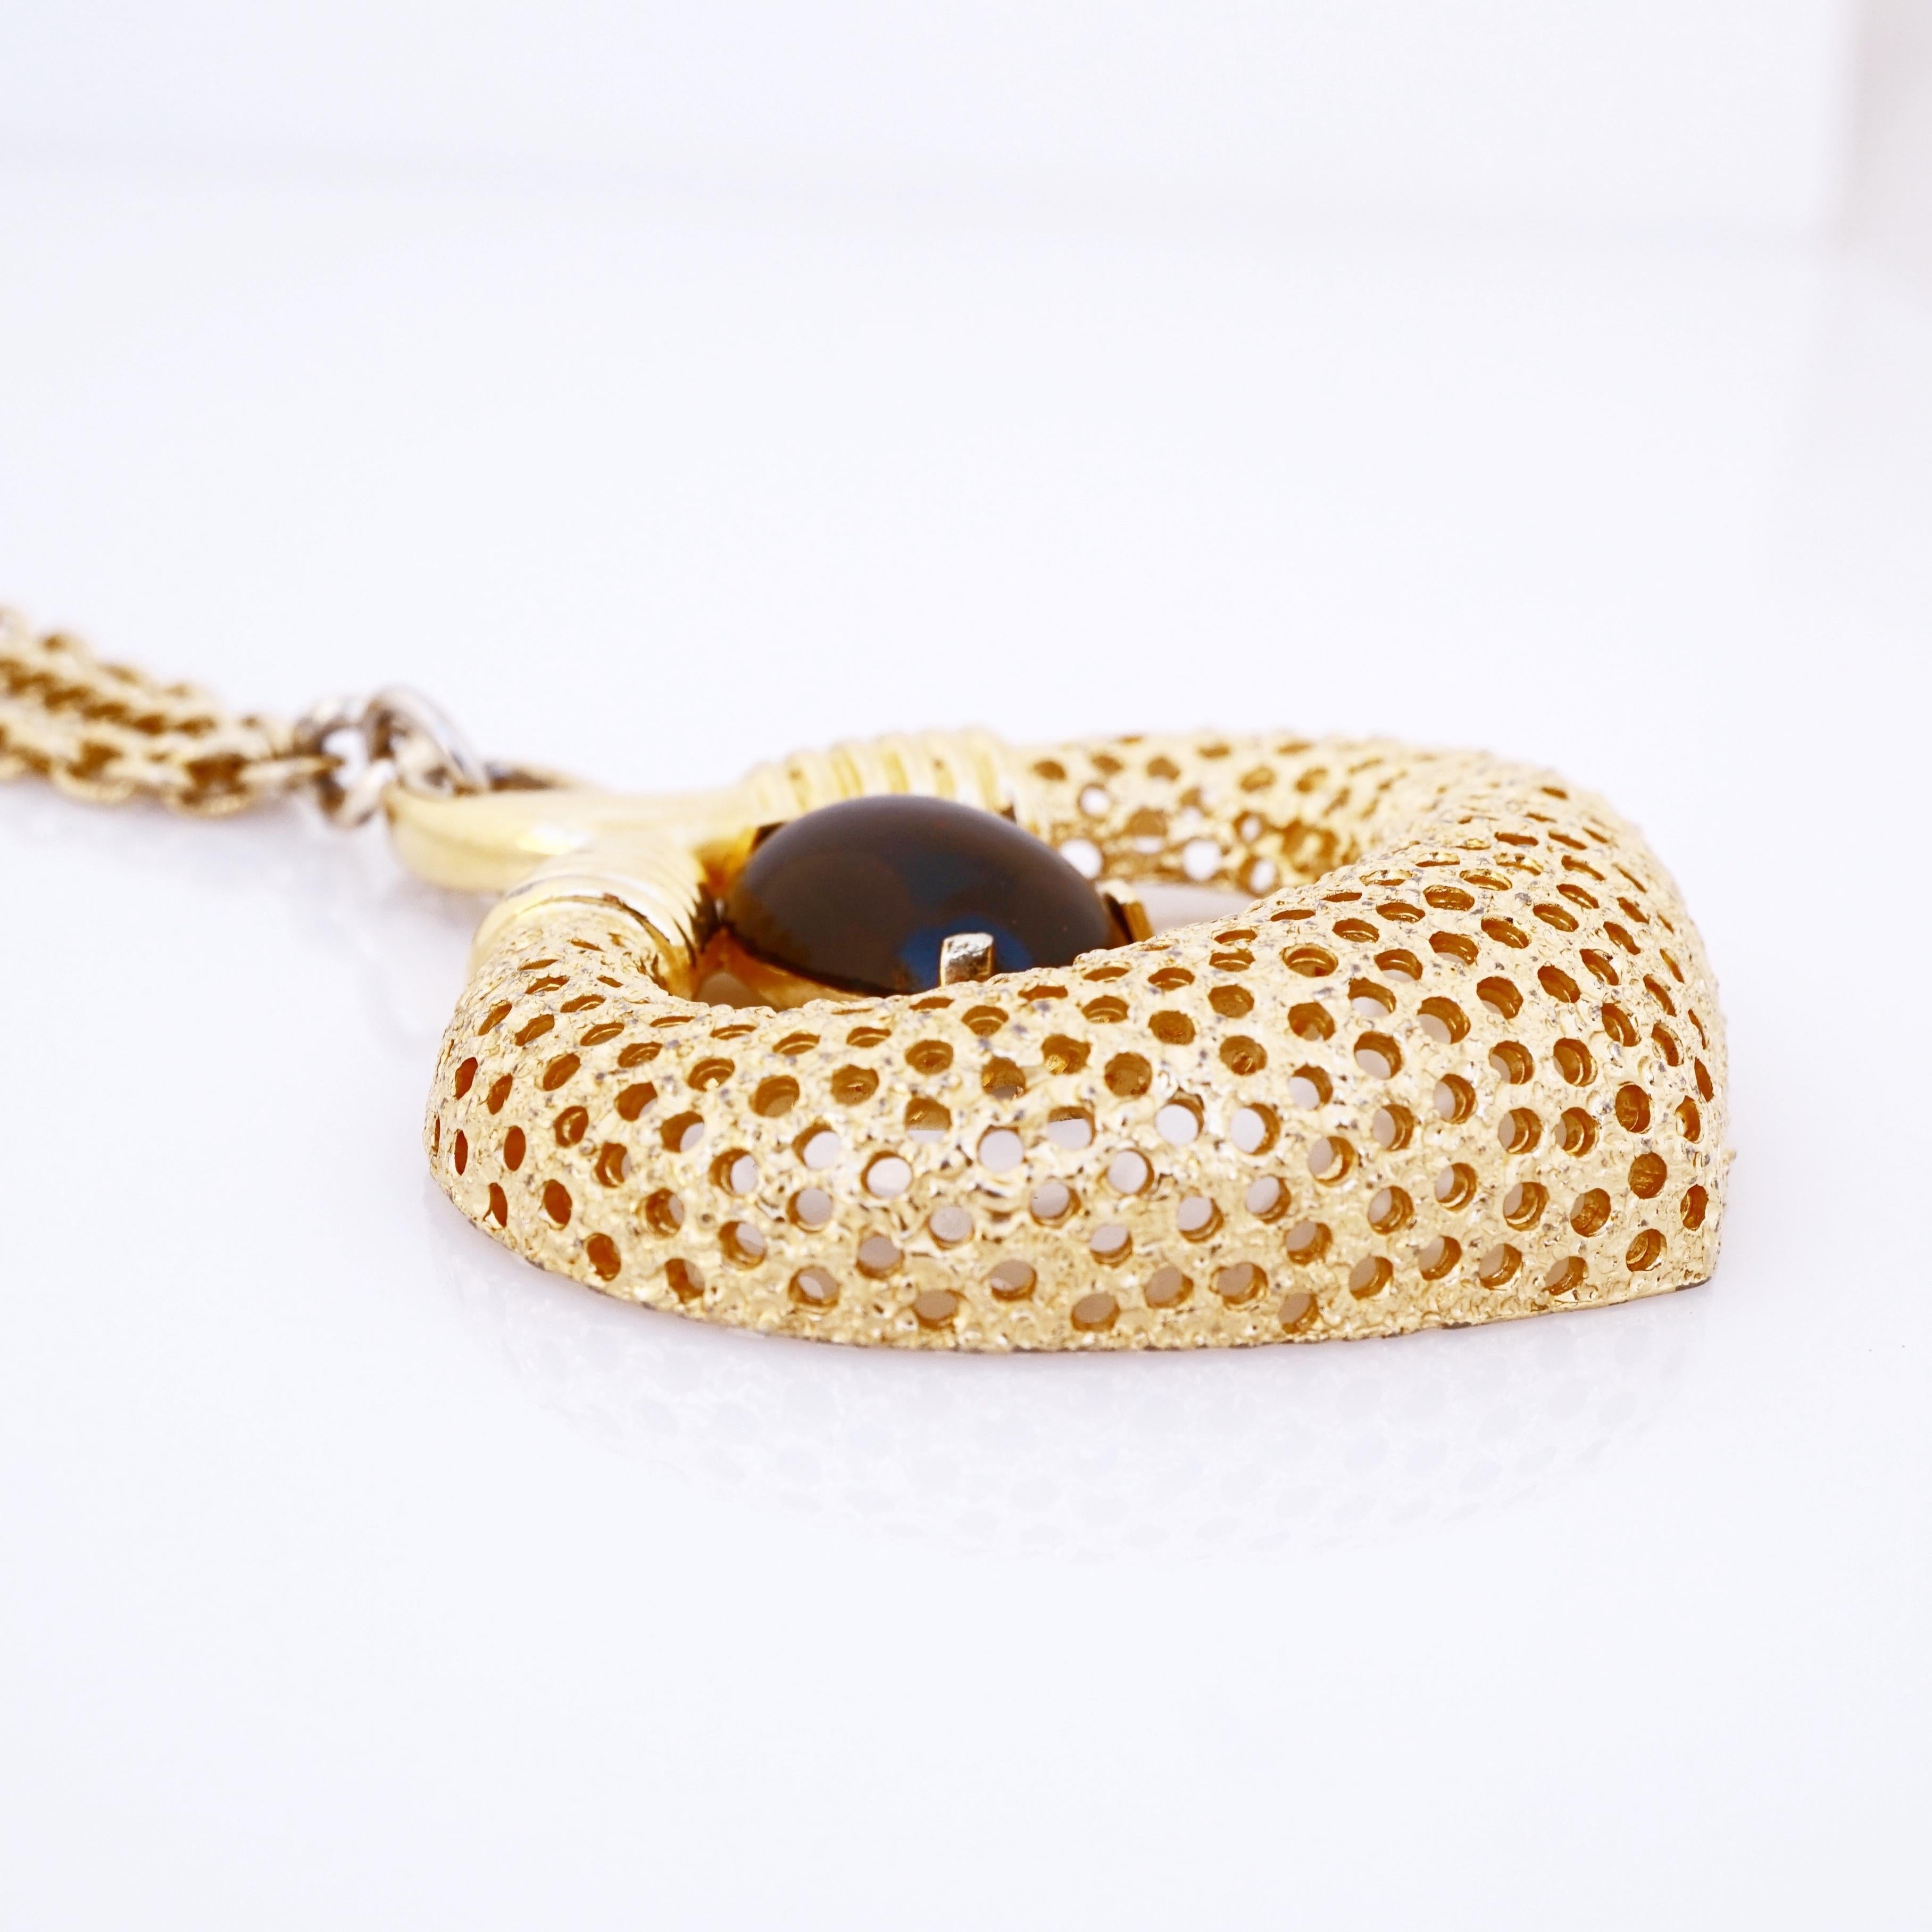 Modern Gold Mod Pendant Statement Necklace With Onyx Cabochon By Jomaz, 1970s For Sale